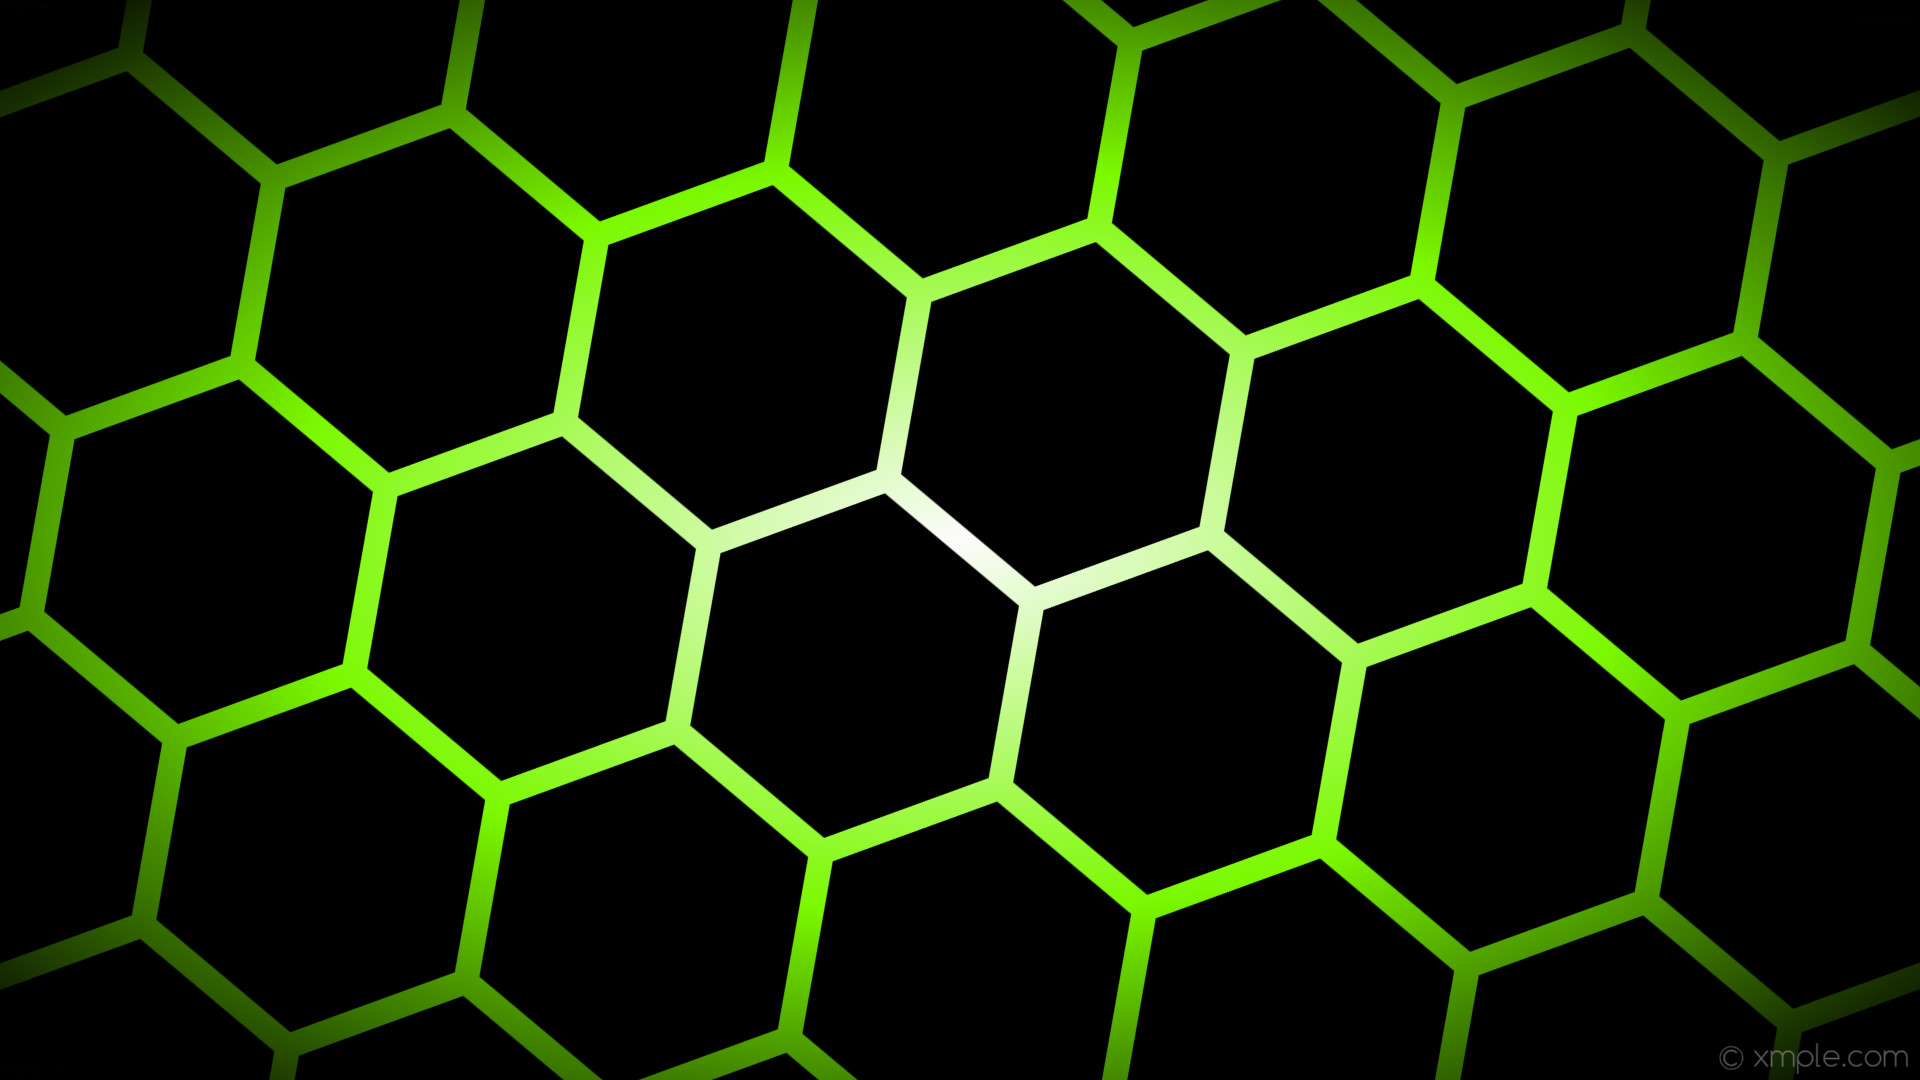 Lime Green And Black Wallpapers